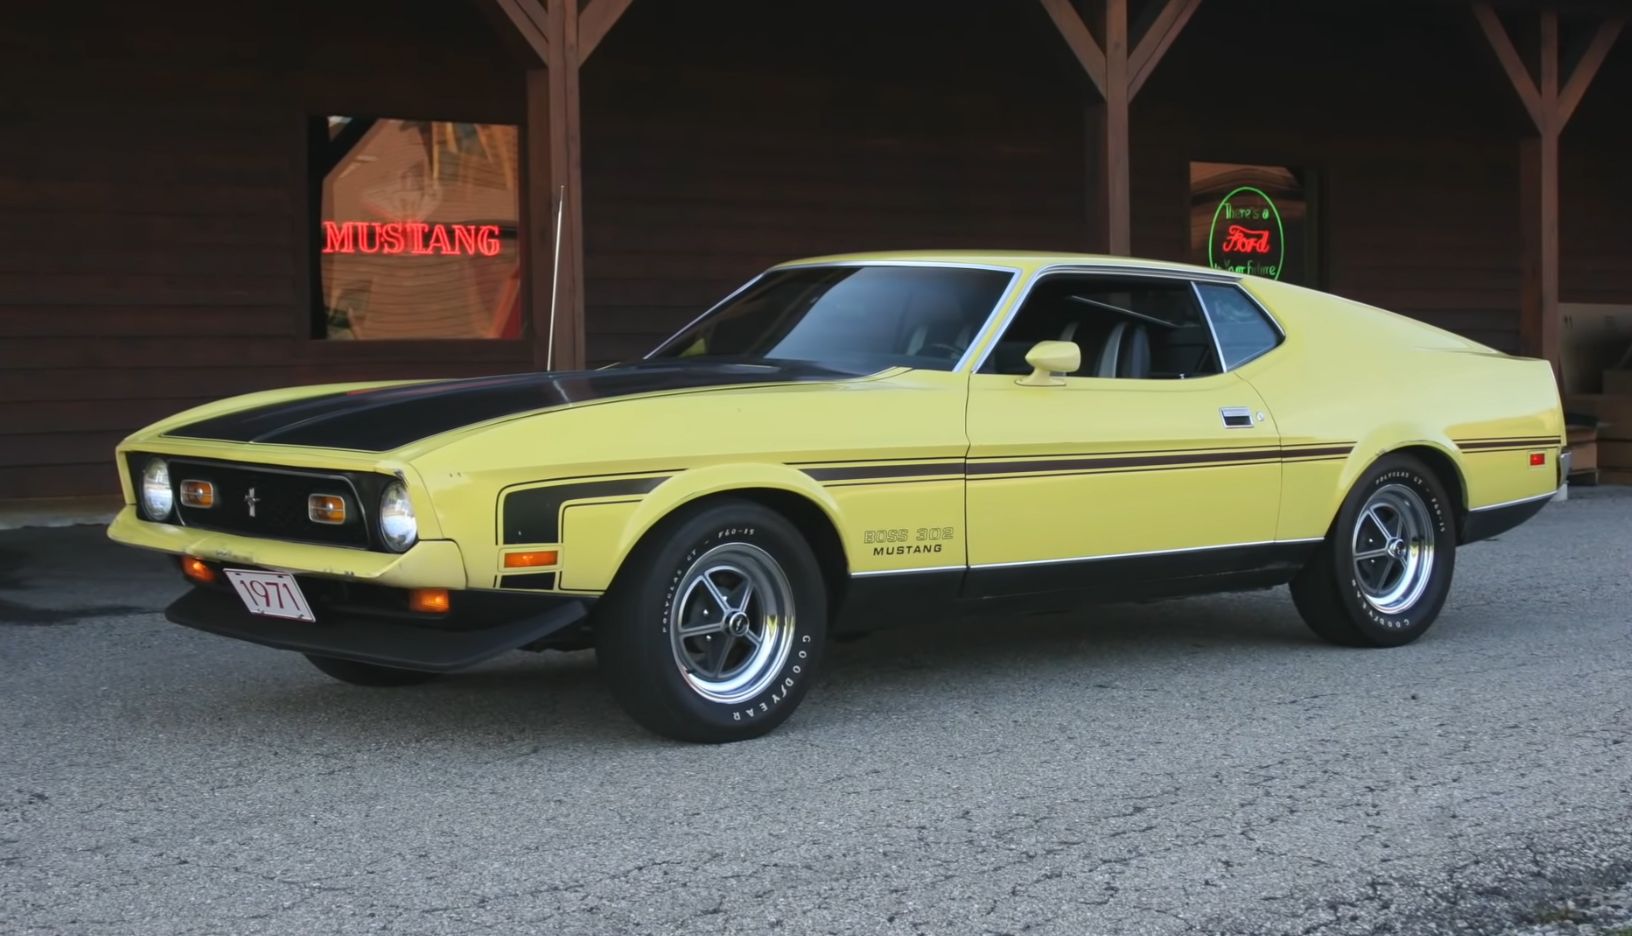 1-of-1 1971 Ford Mustang Boss 302 Prototype Being Restored